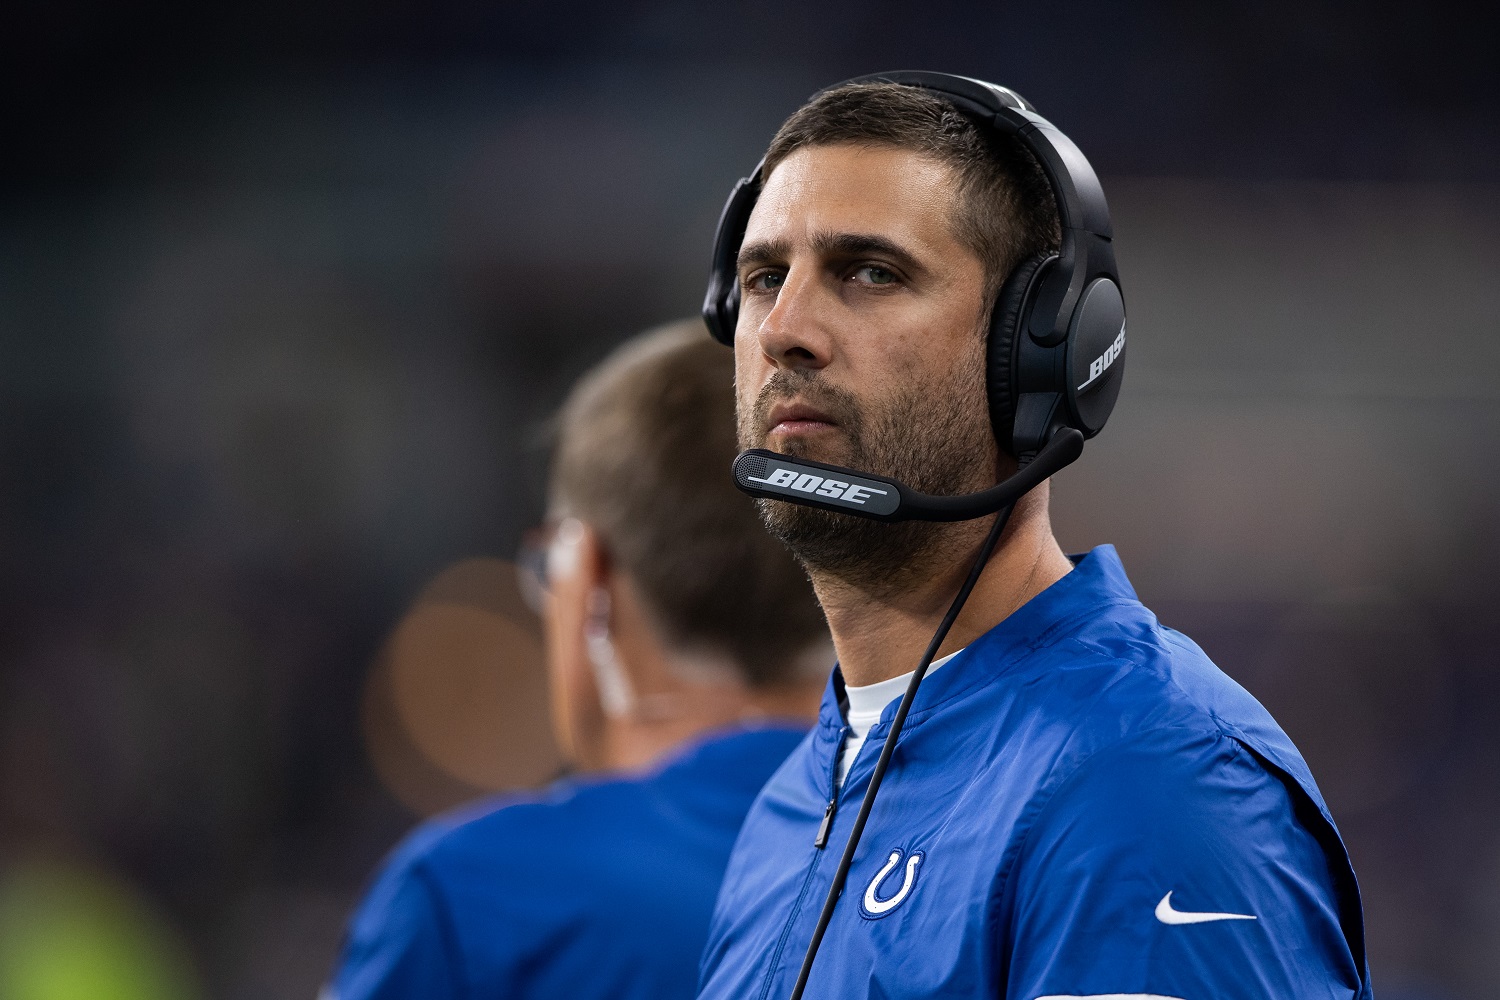 New Philadelphia Eagles head coach Nick Sirianni spent three seasons as the offensive coordinator of the NFL's Indianapolis Colts.